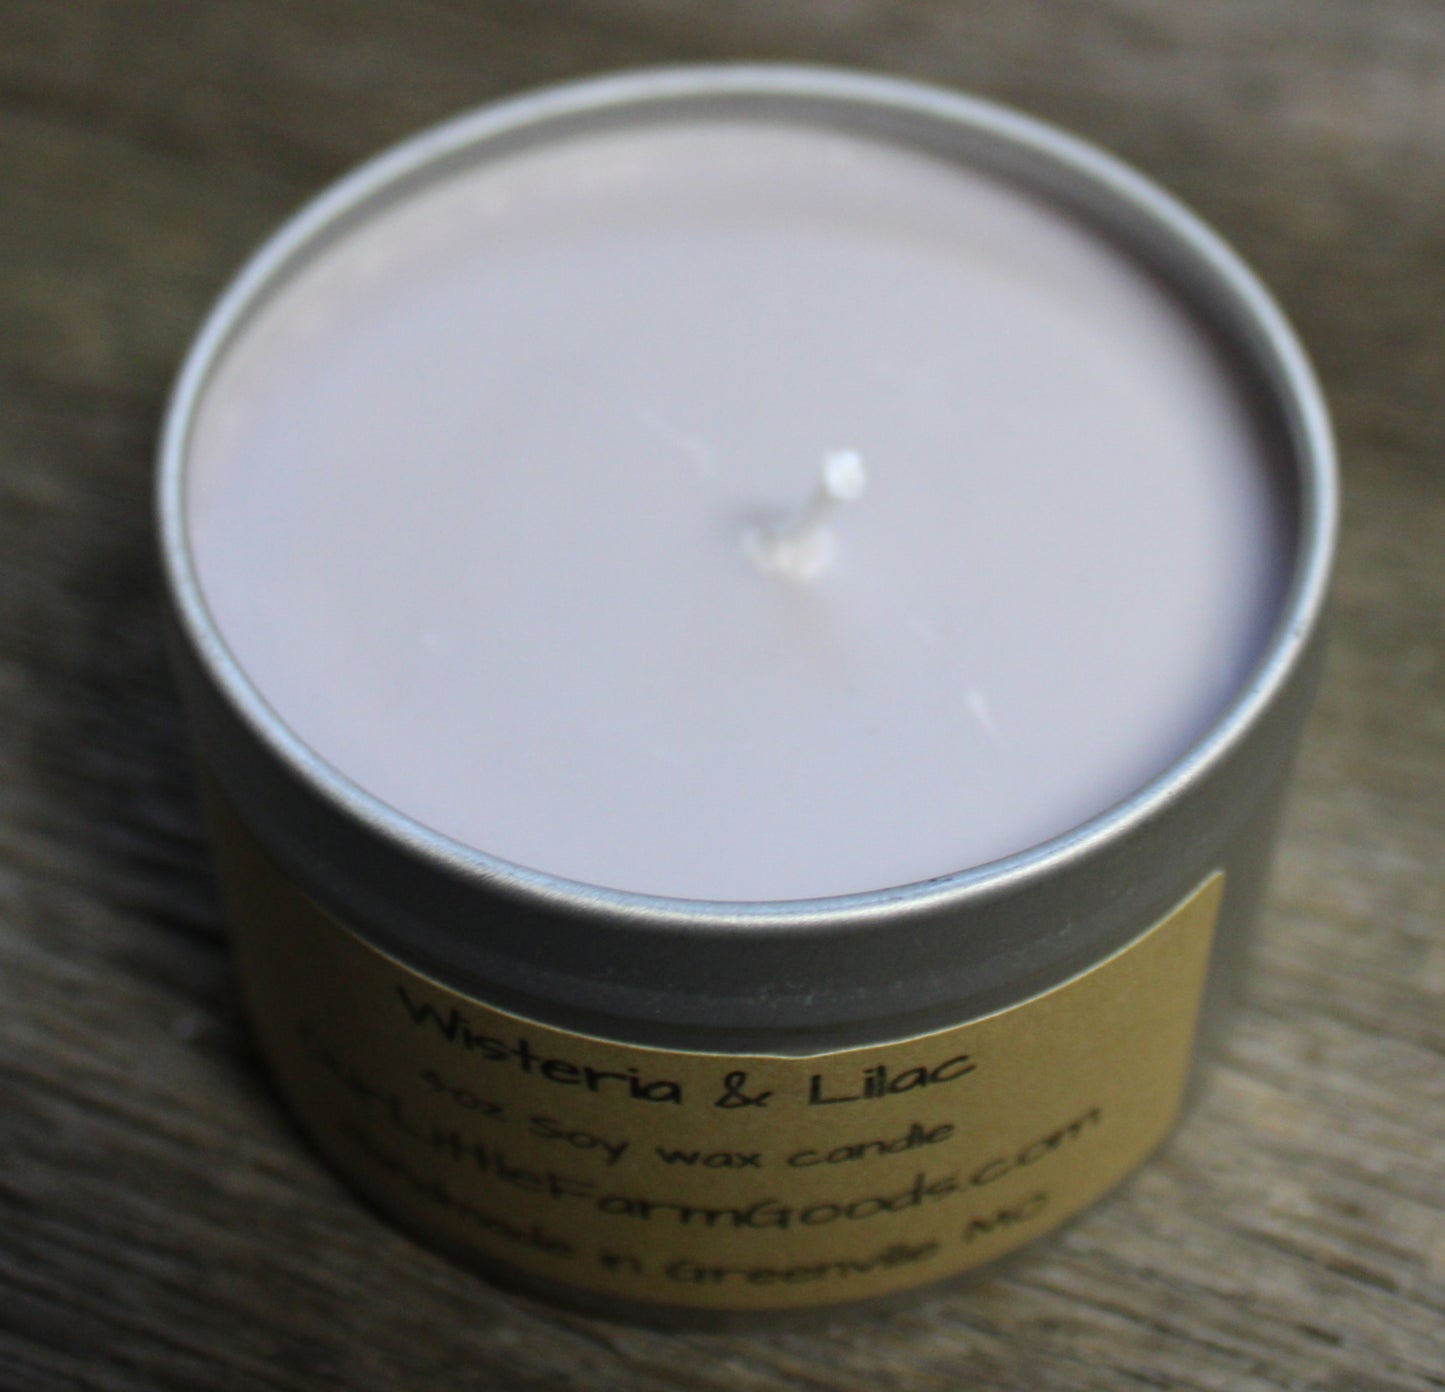 Wisteria and Lilac Candle 4oz